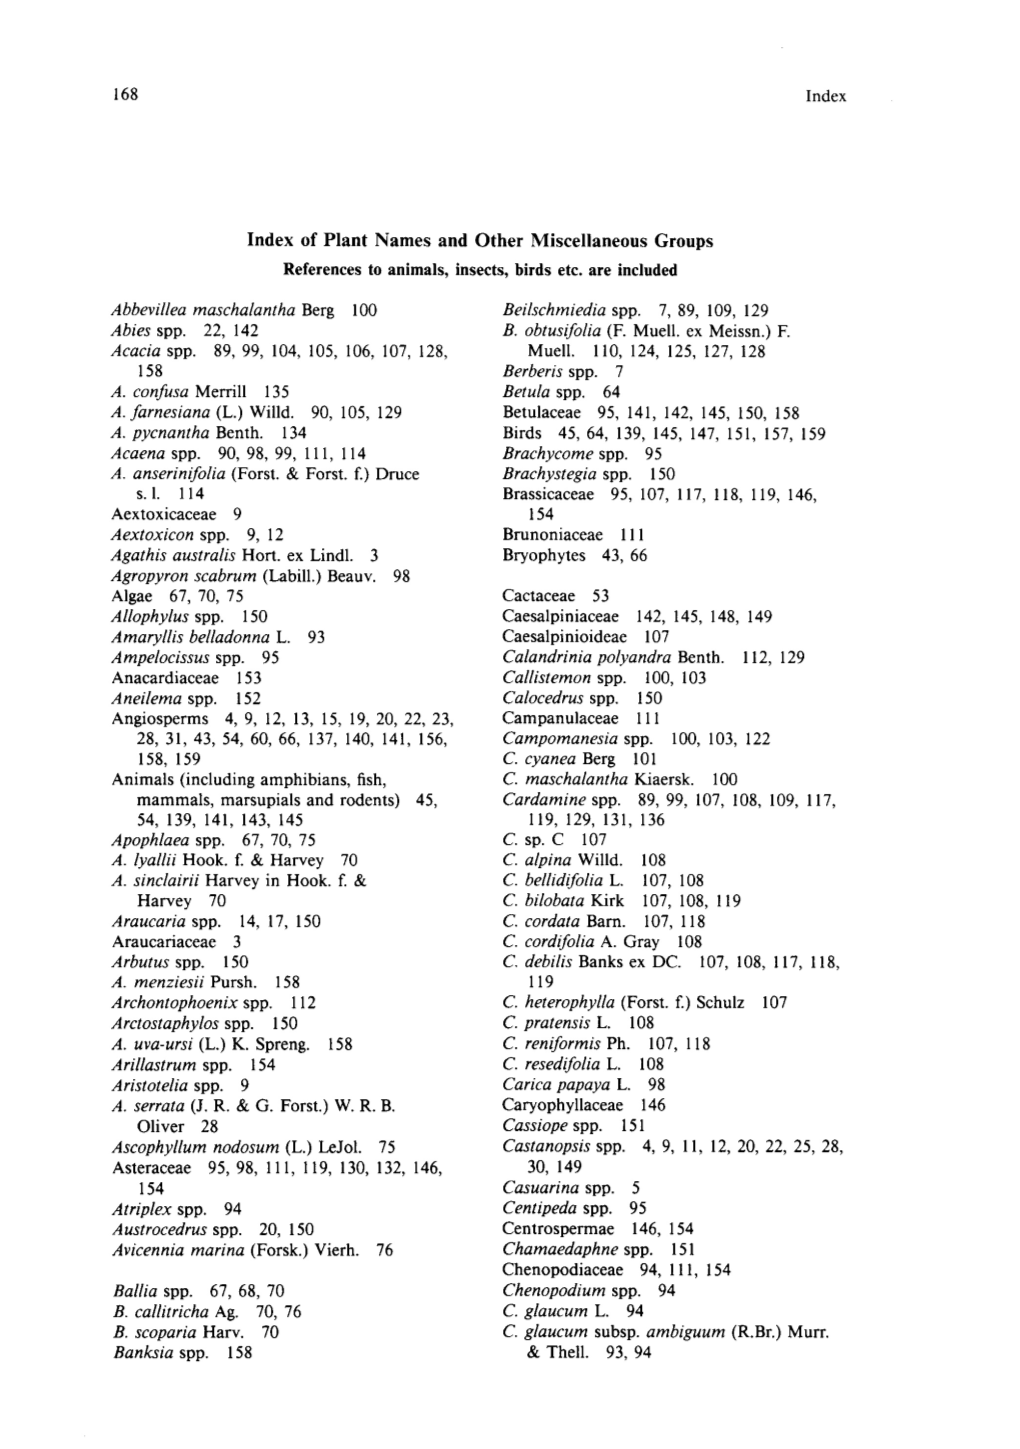 Index of Plant Names and Other Miscellaneous Groups References to Animals, Insects, Birds Etc